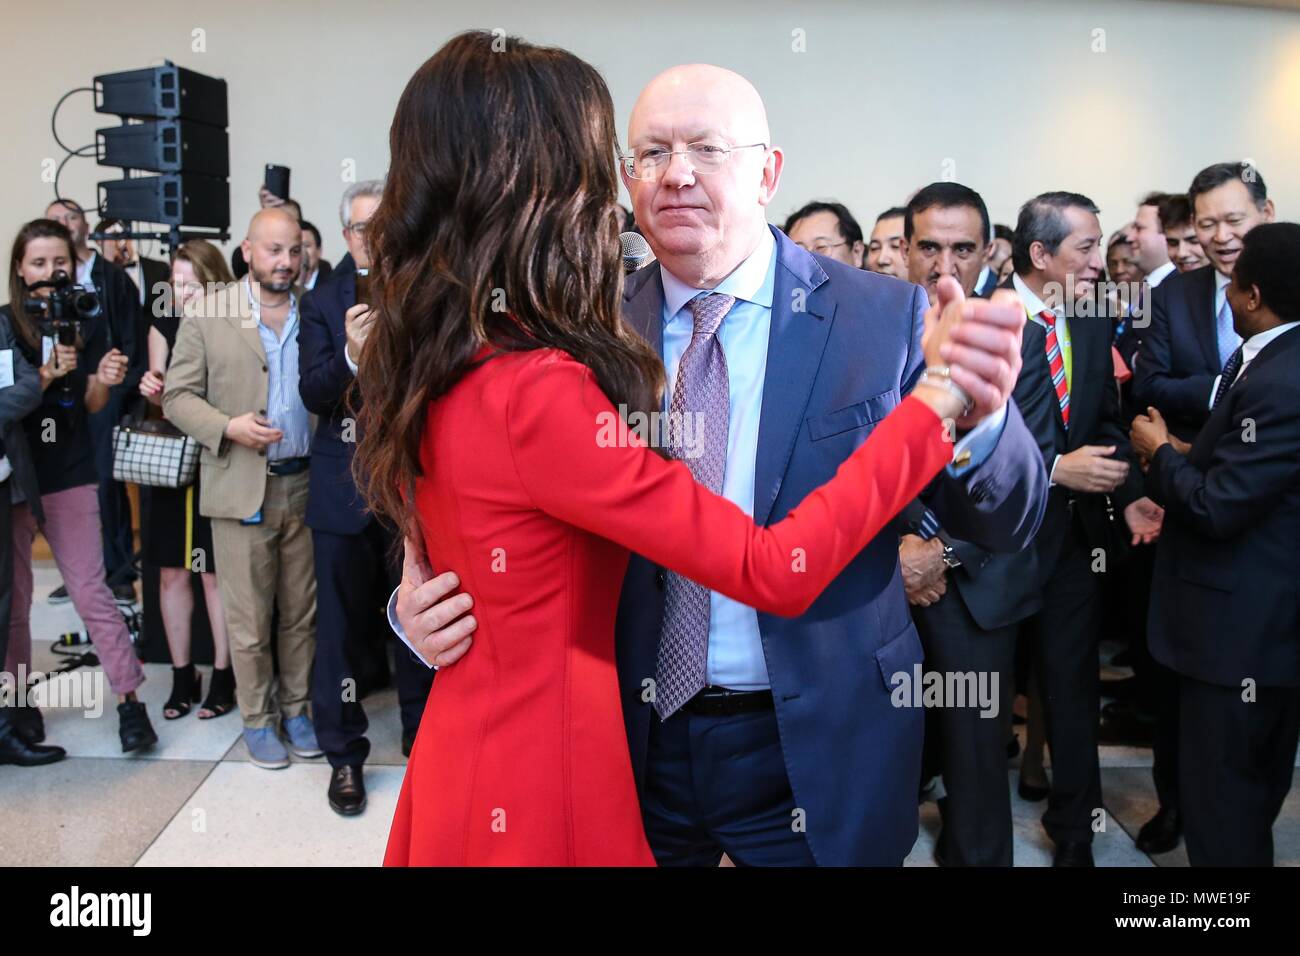 New York, New York, USA. 1st June, 2018. The ambassador of Russia to the  UNO Vasily Nebenzya and Russian singer Zara during a 2018 World Cup  presentation event at the United Nations